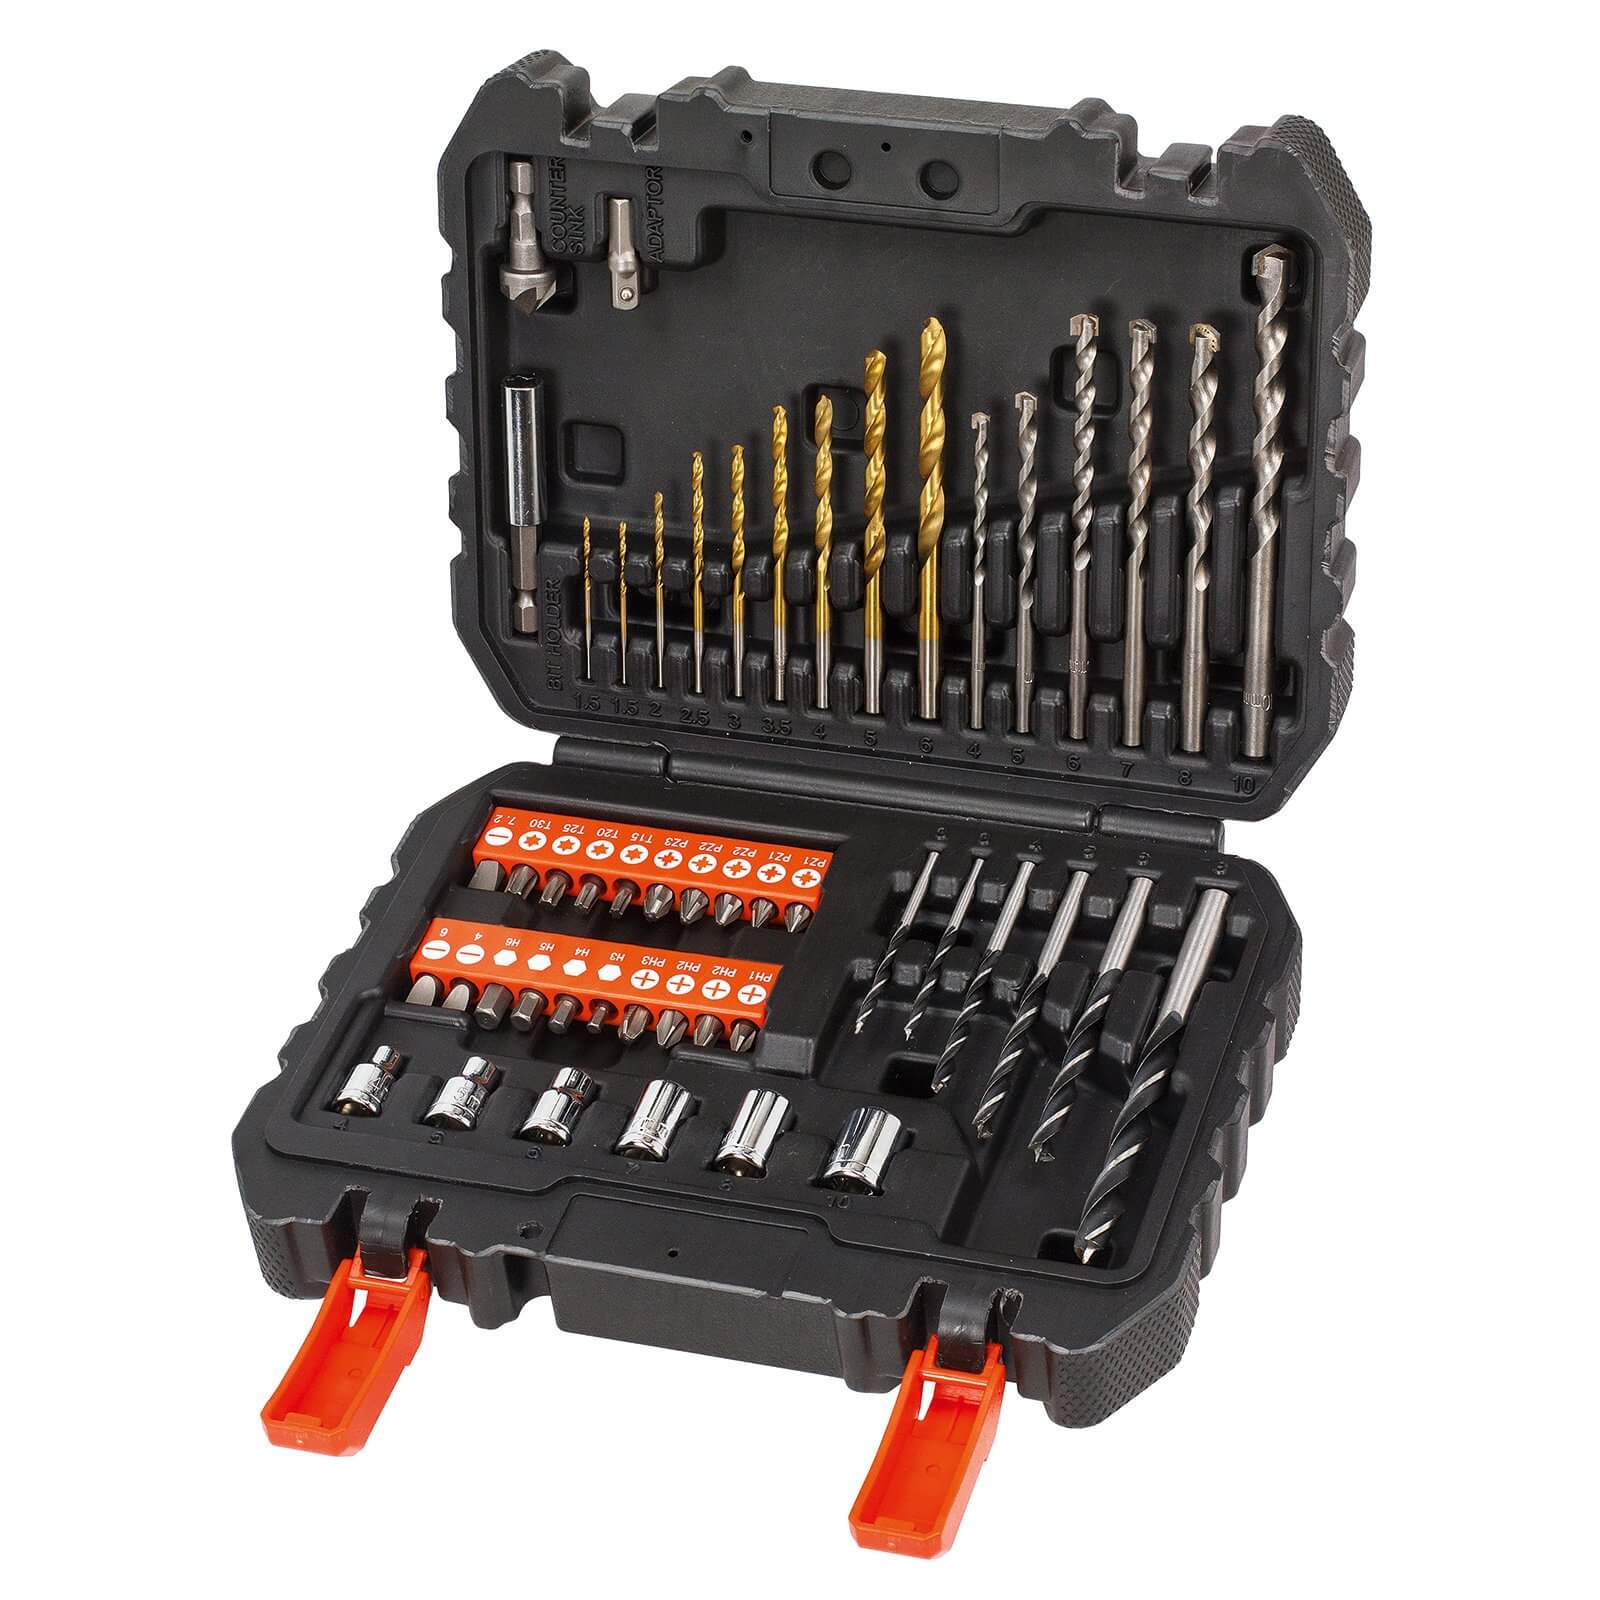 Photo of Black+decker 50 Piece Mixed Drilling & Screwdriving Accessory Set